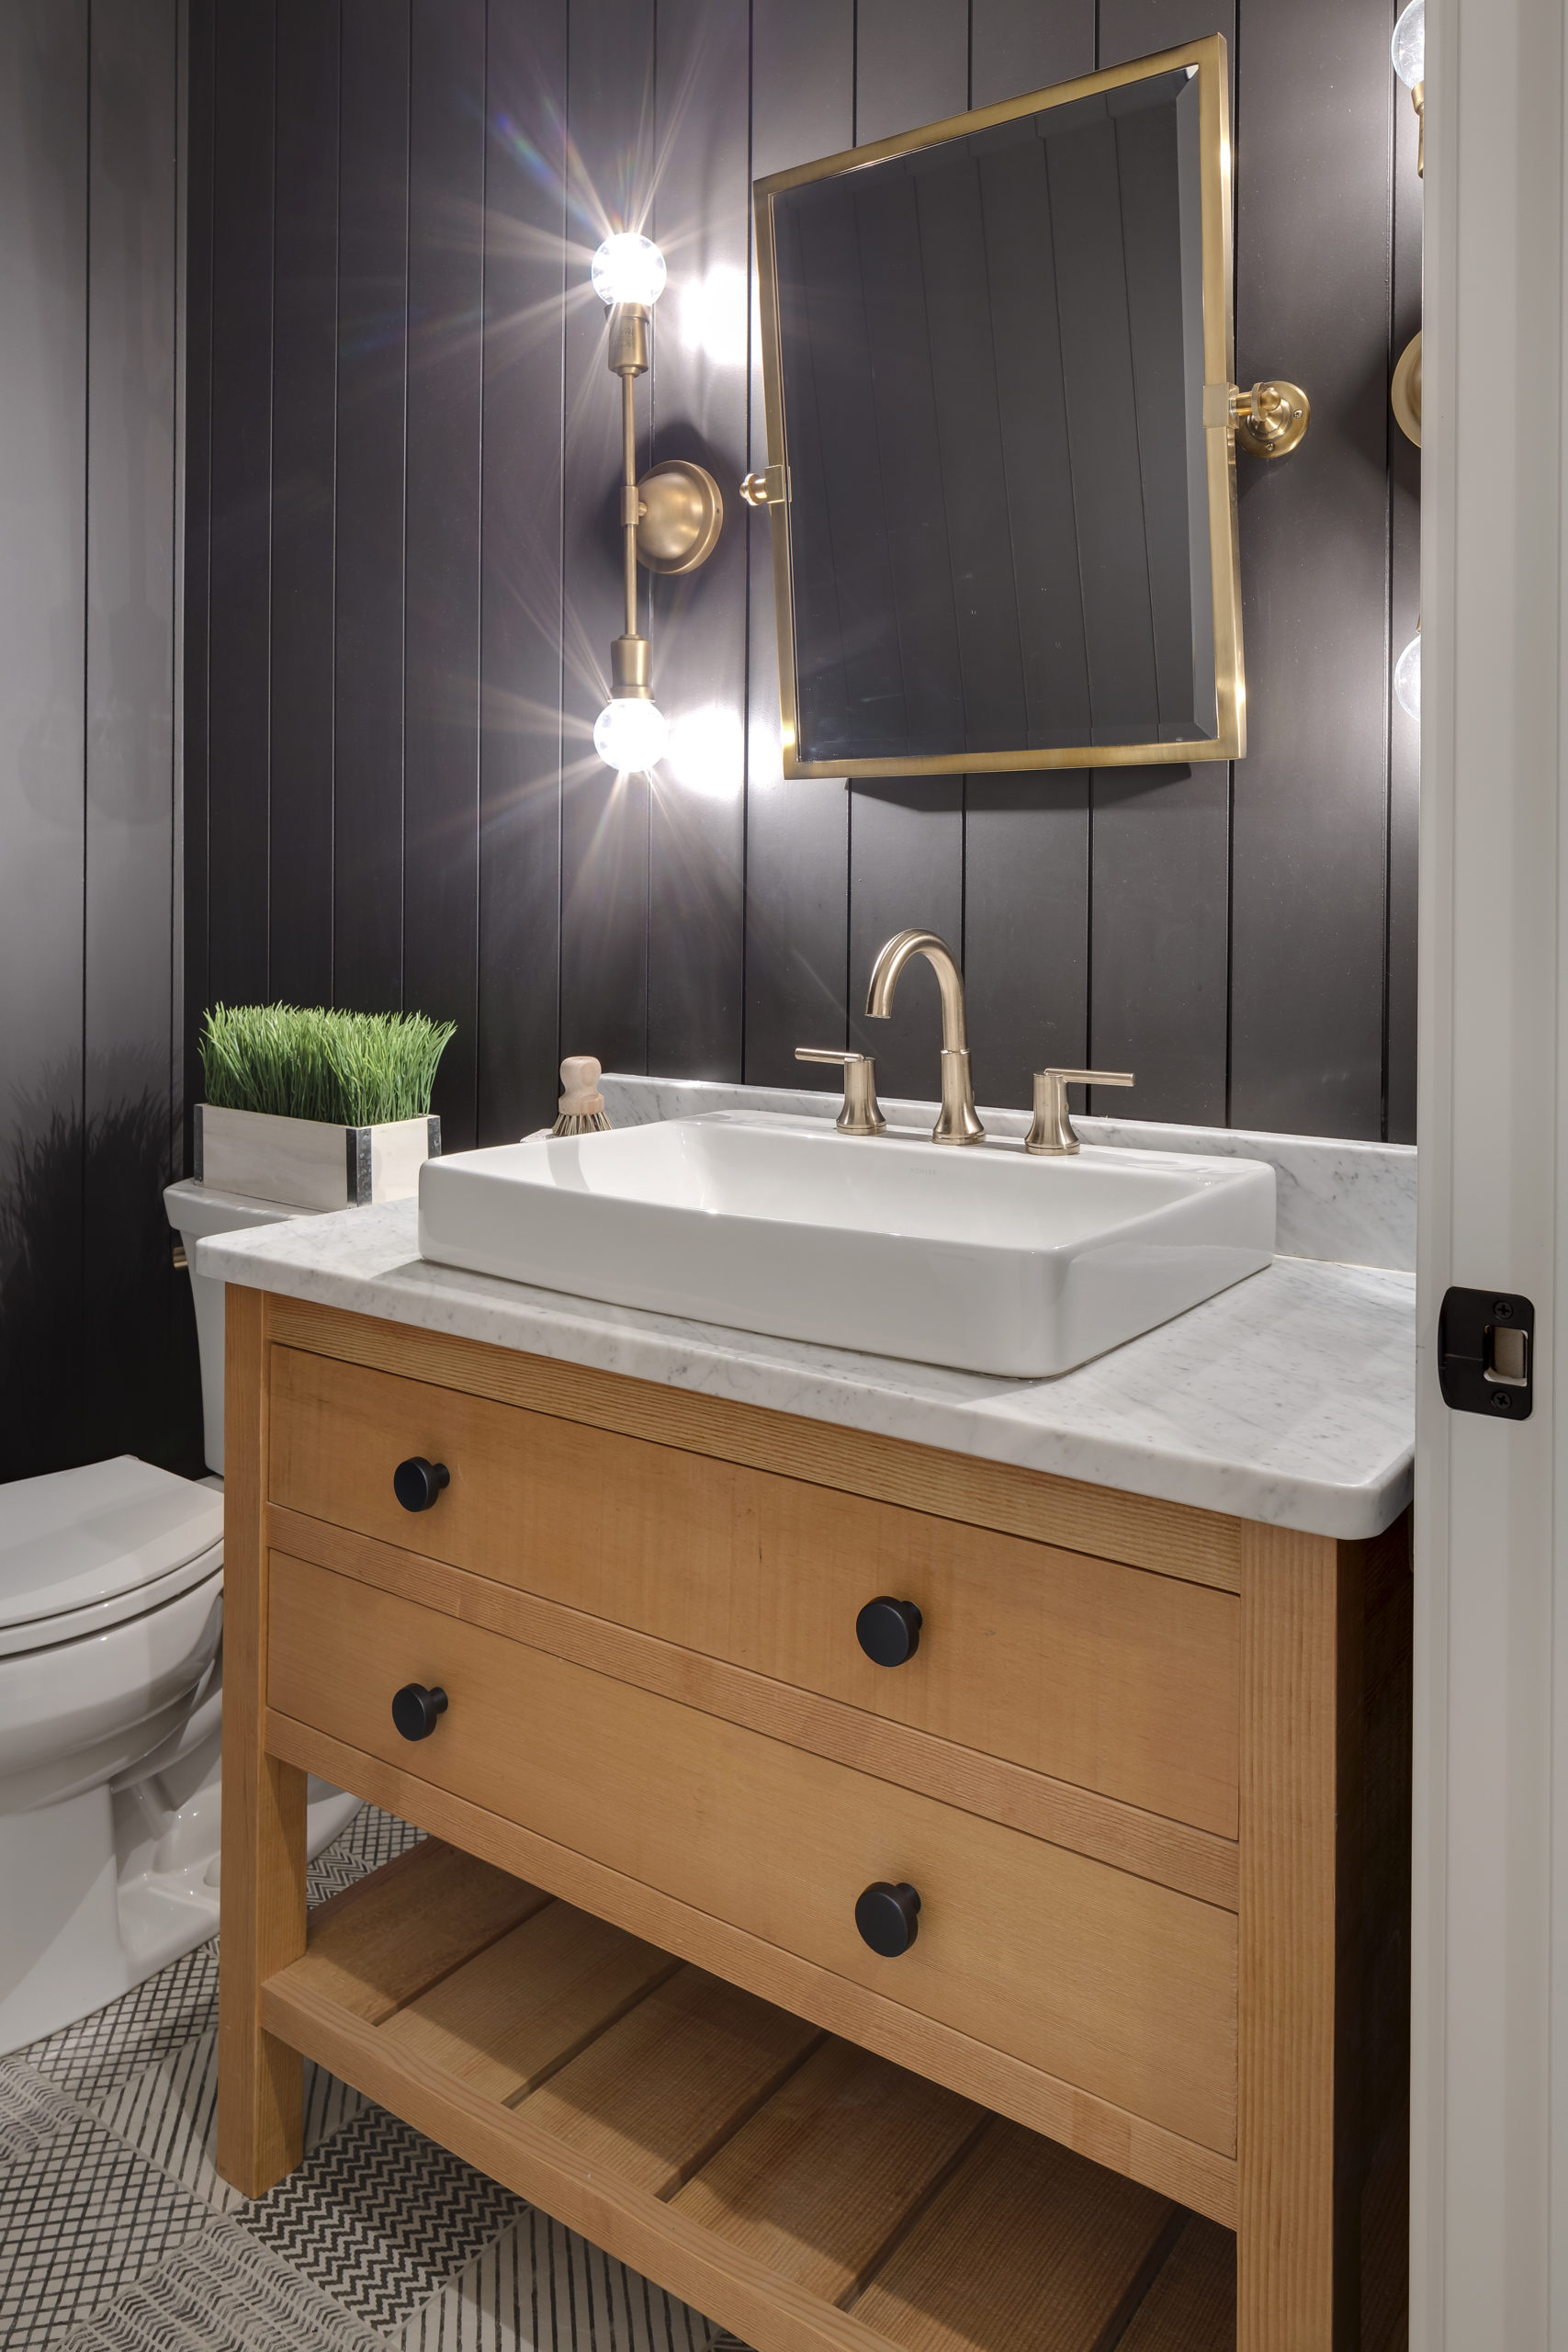 A bathroom with black walls and wood paneling.